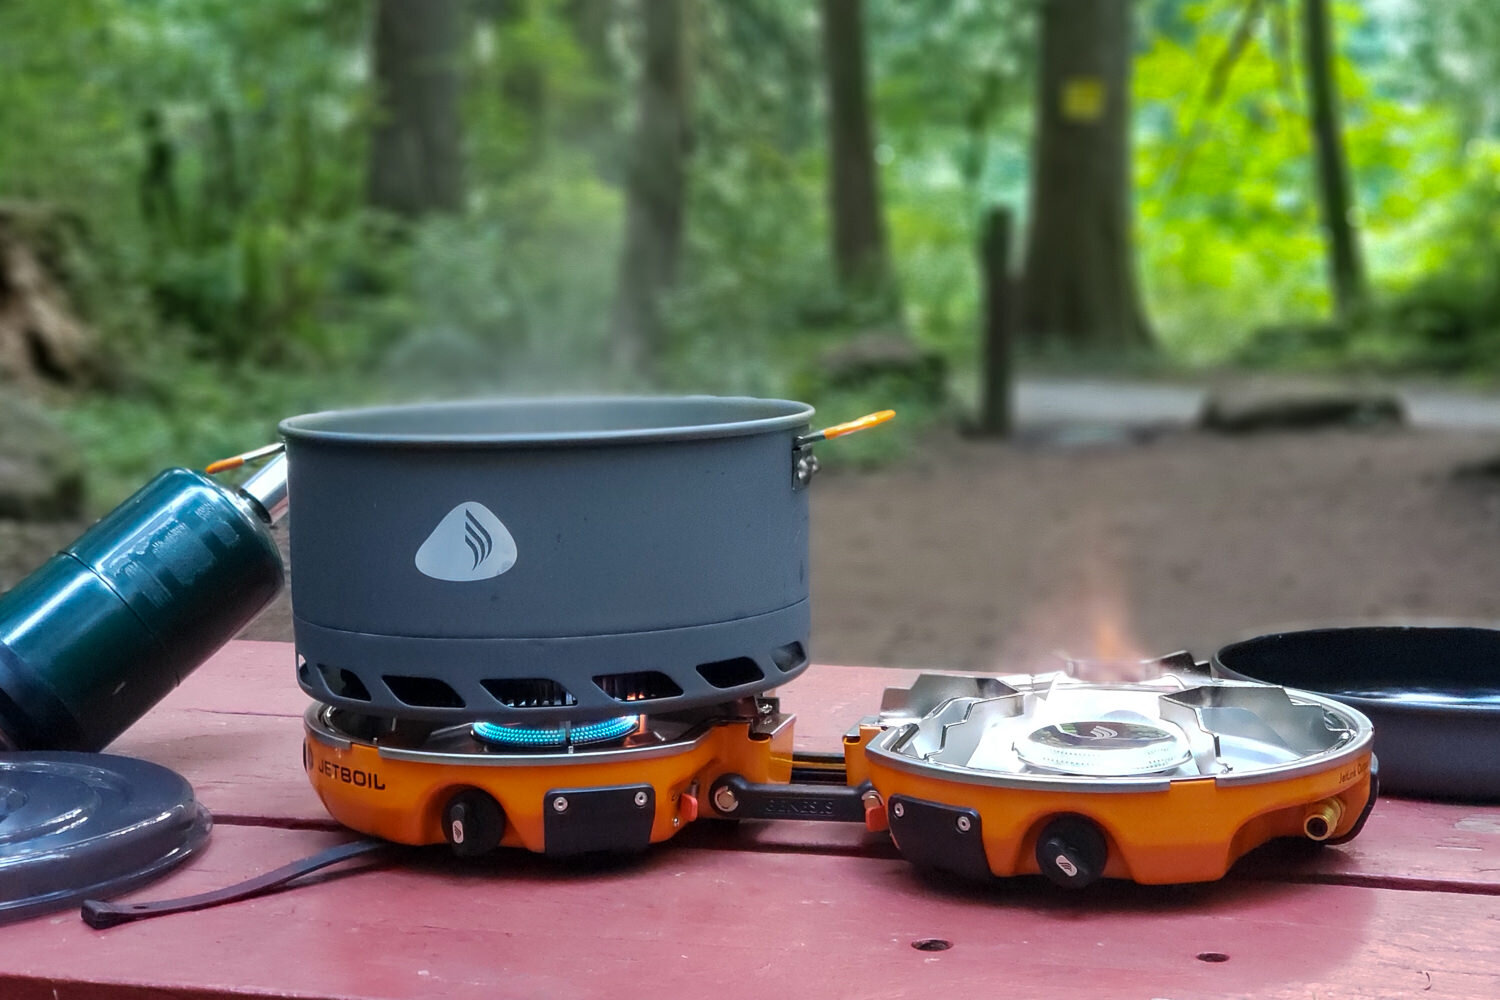 https://www.cleverhiker.com/wp-content/uploads/2023/08/The-Jetboil-Genesis-Basecamp-System-being-used-to-boil-water-in-a-campsite.jpeg